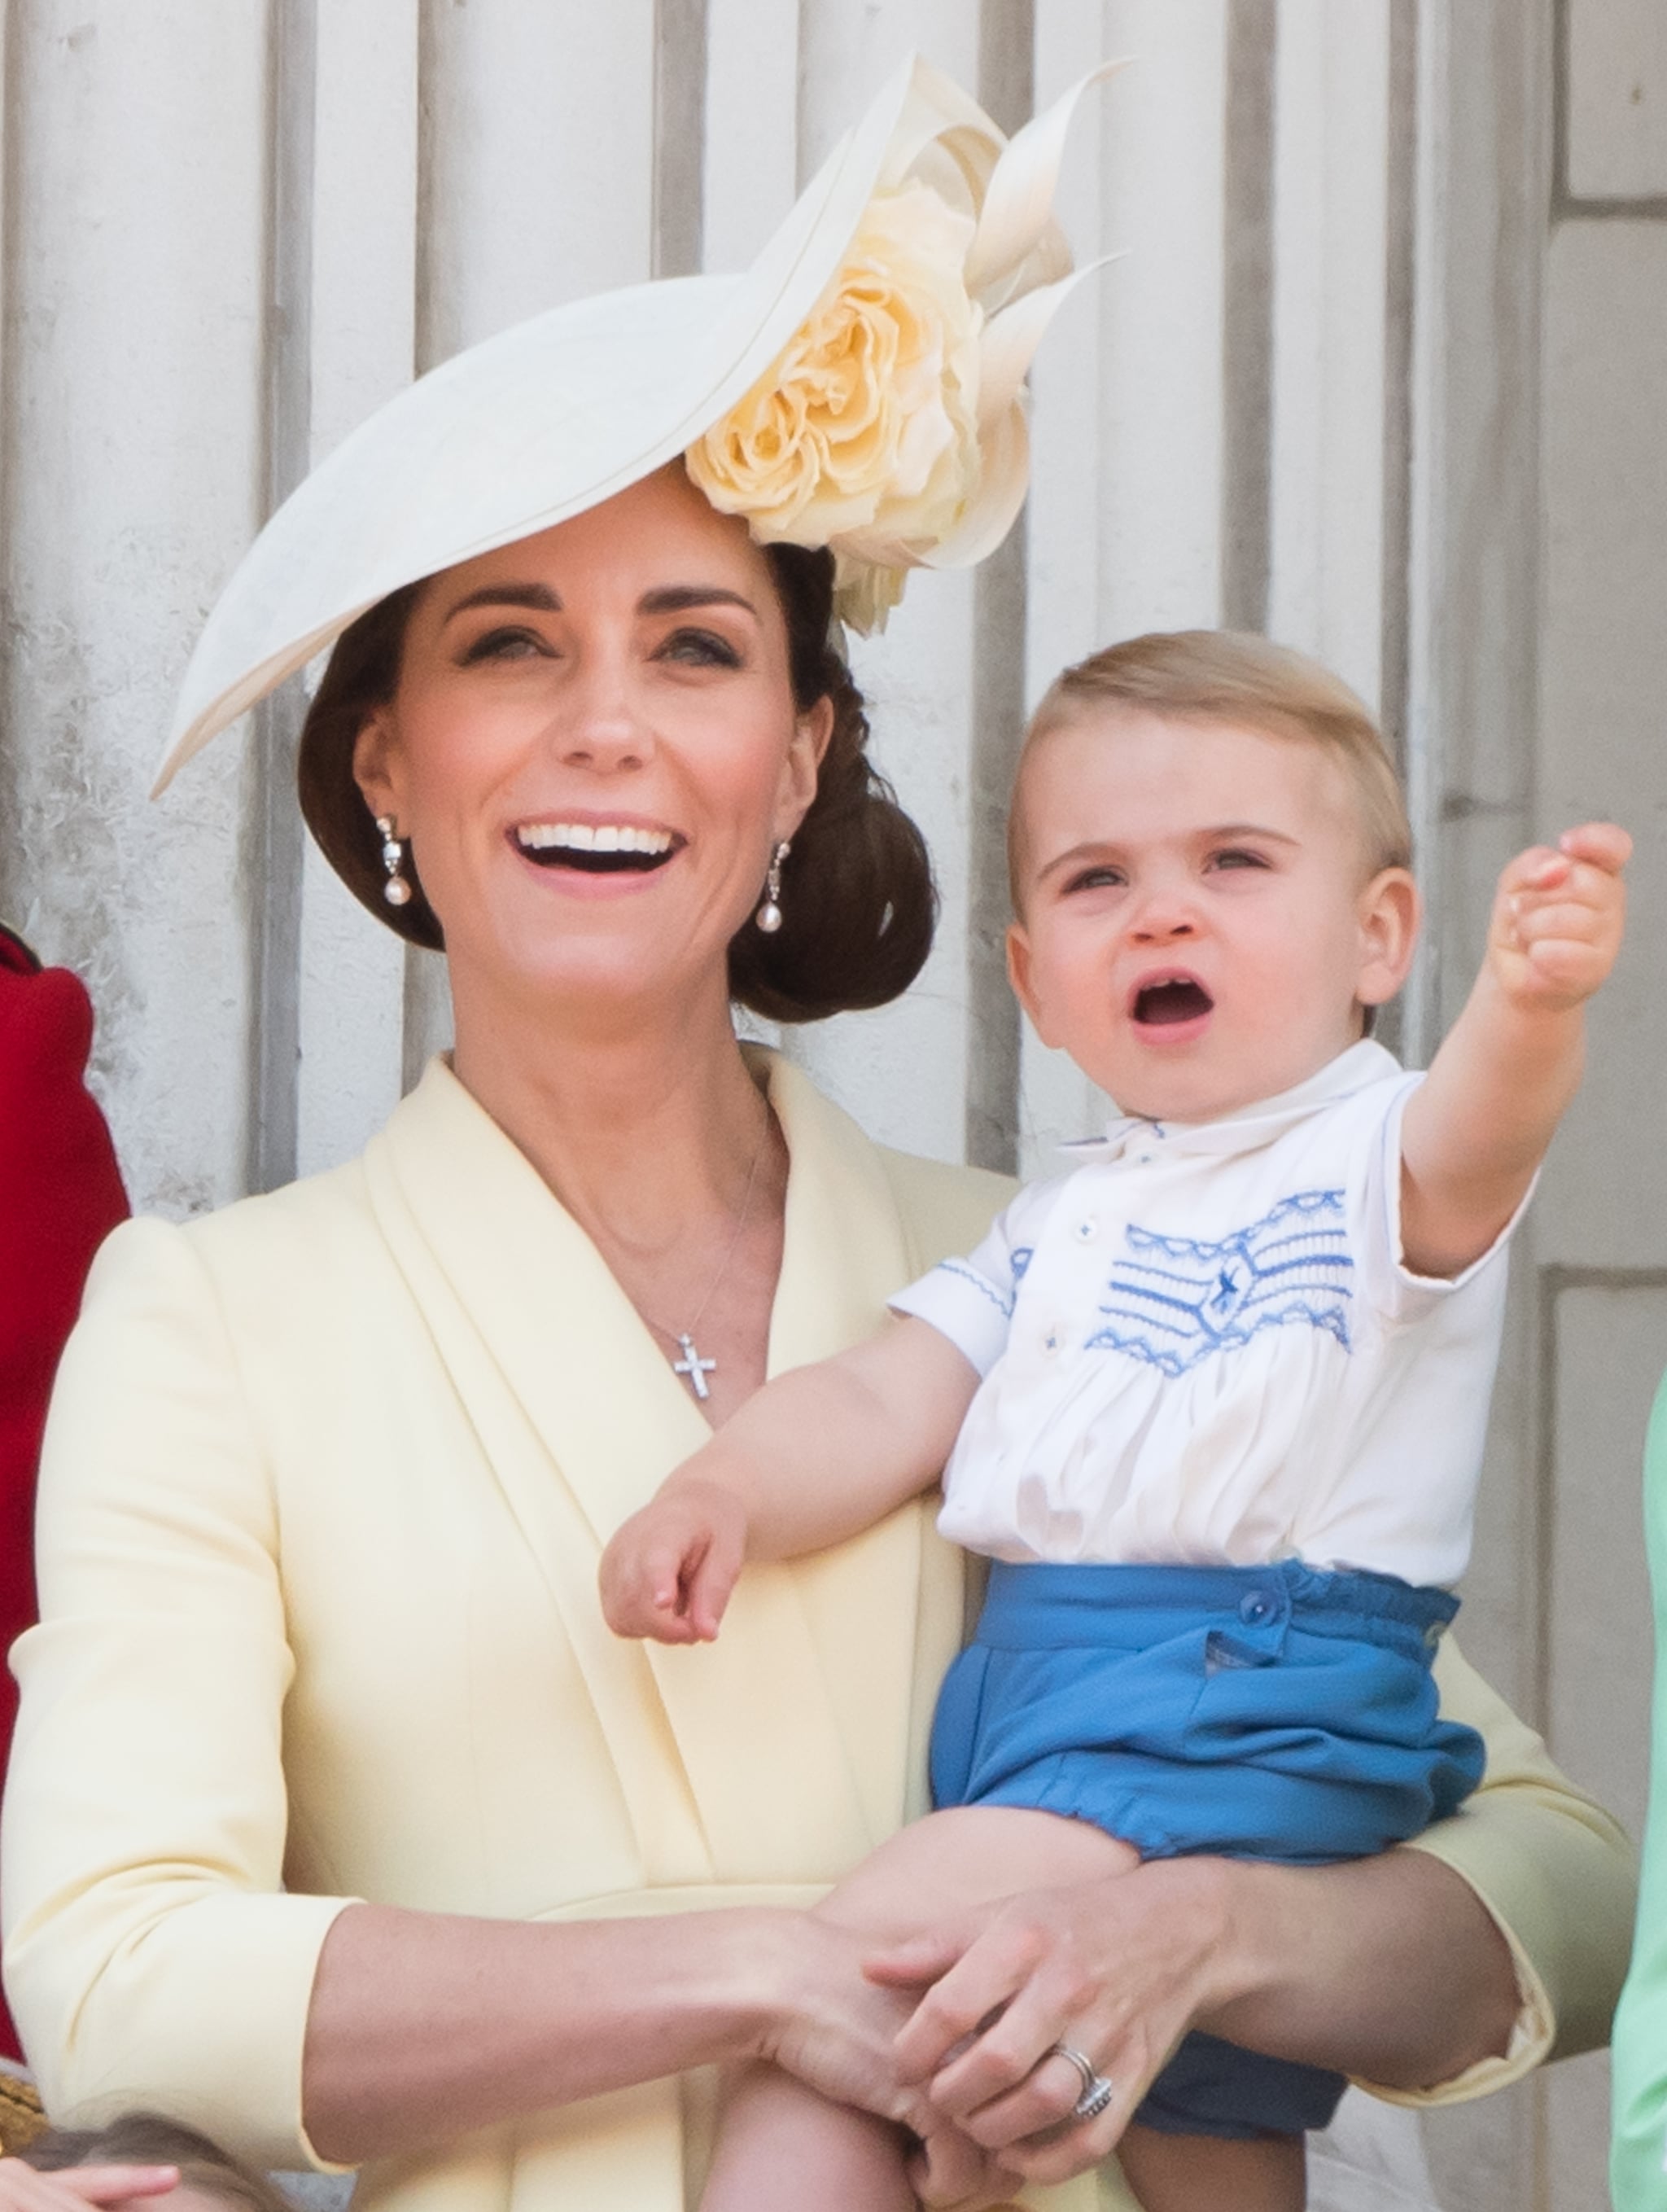 LONDON, ENGLAND - JUNE 08: Prince Louis and Catherine, Duchess of Cambridge appear on the balcony during Trooping The Colour, the Queen's annual birthday parade, on June 08, 2019 in London, England. (Photo by Samir Hussein/Samir Hussein/WireImage)